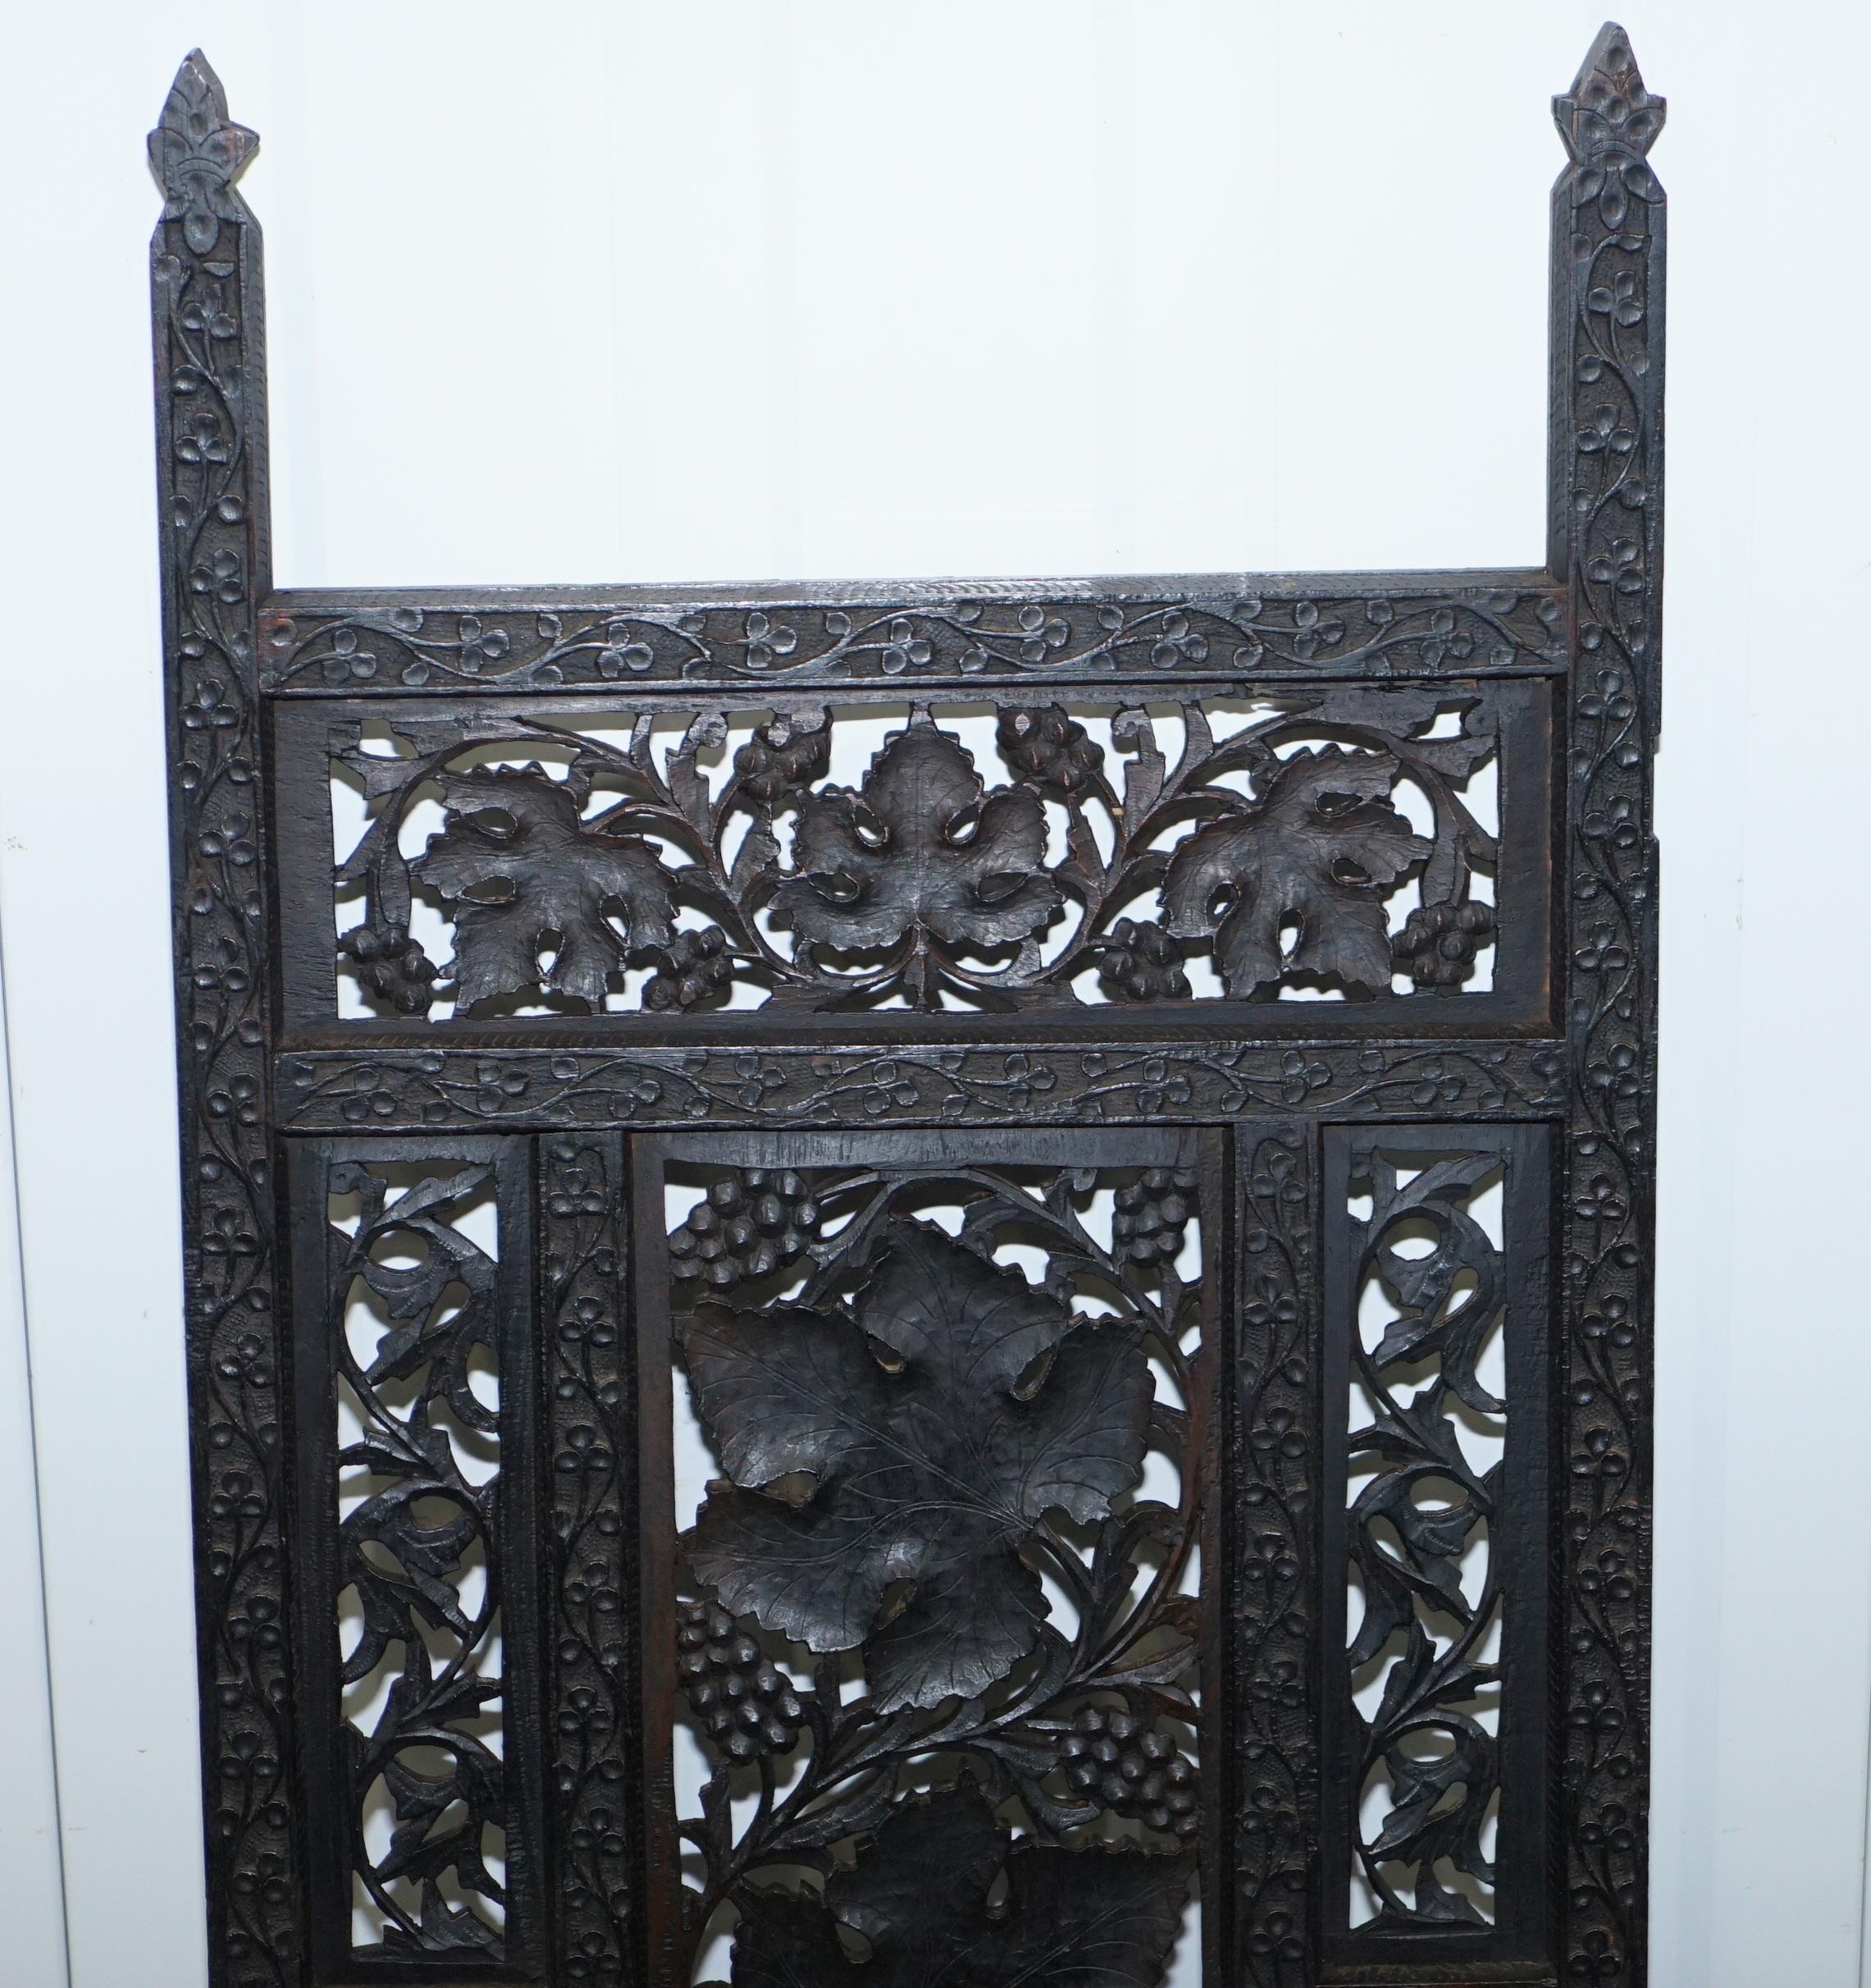 Rare Chinese Fretwork Carved Wall Panels Depicting Leaves Solid Teak Art Wood 10